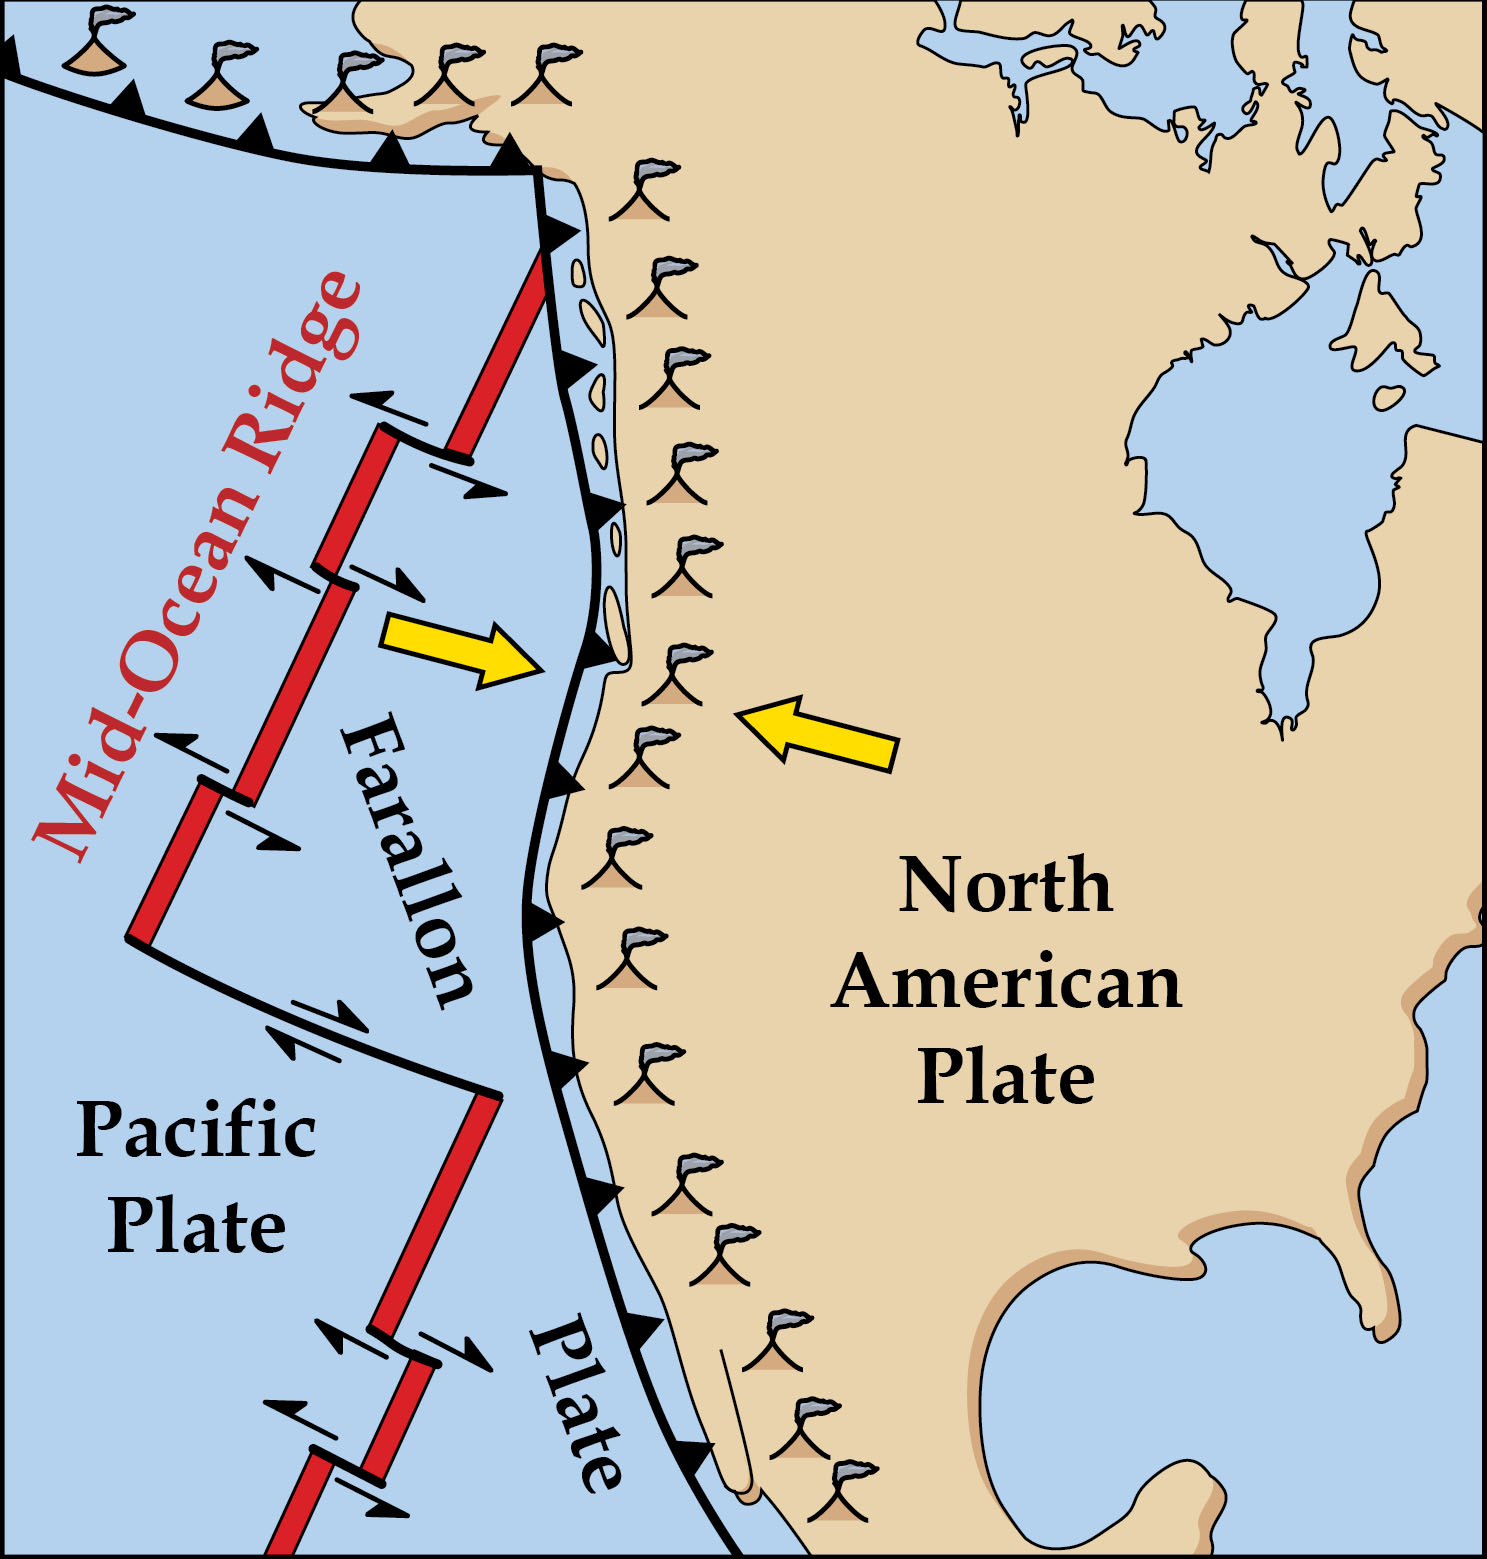 Pacific Northwest Fault Line Map